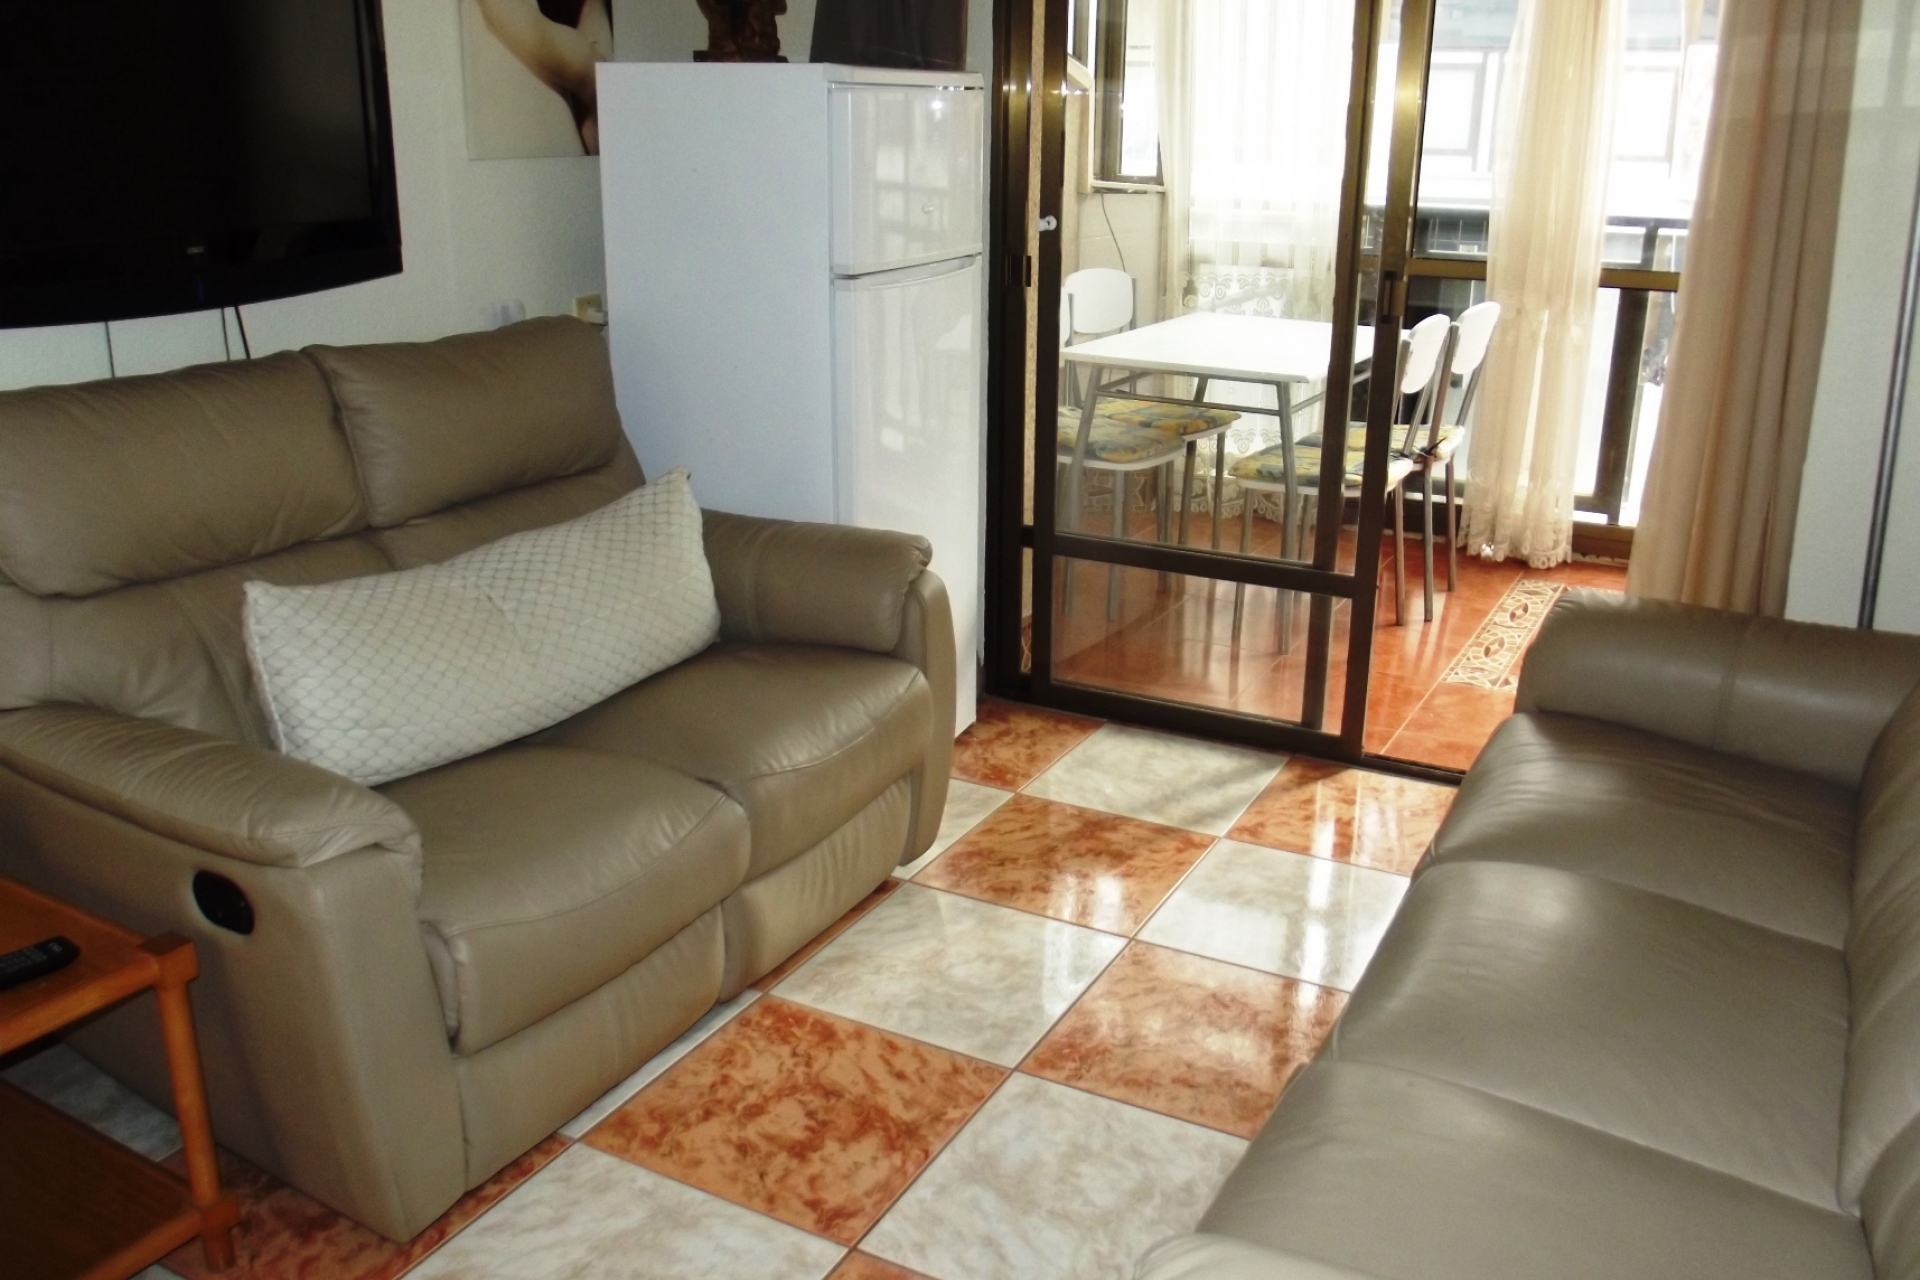 Property Sold - Apartment for sale - Torrevieja - San Luis